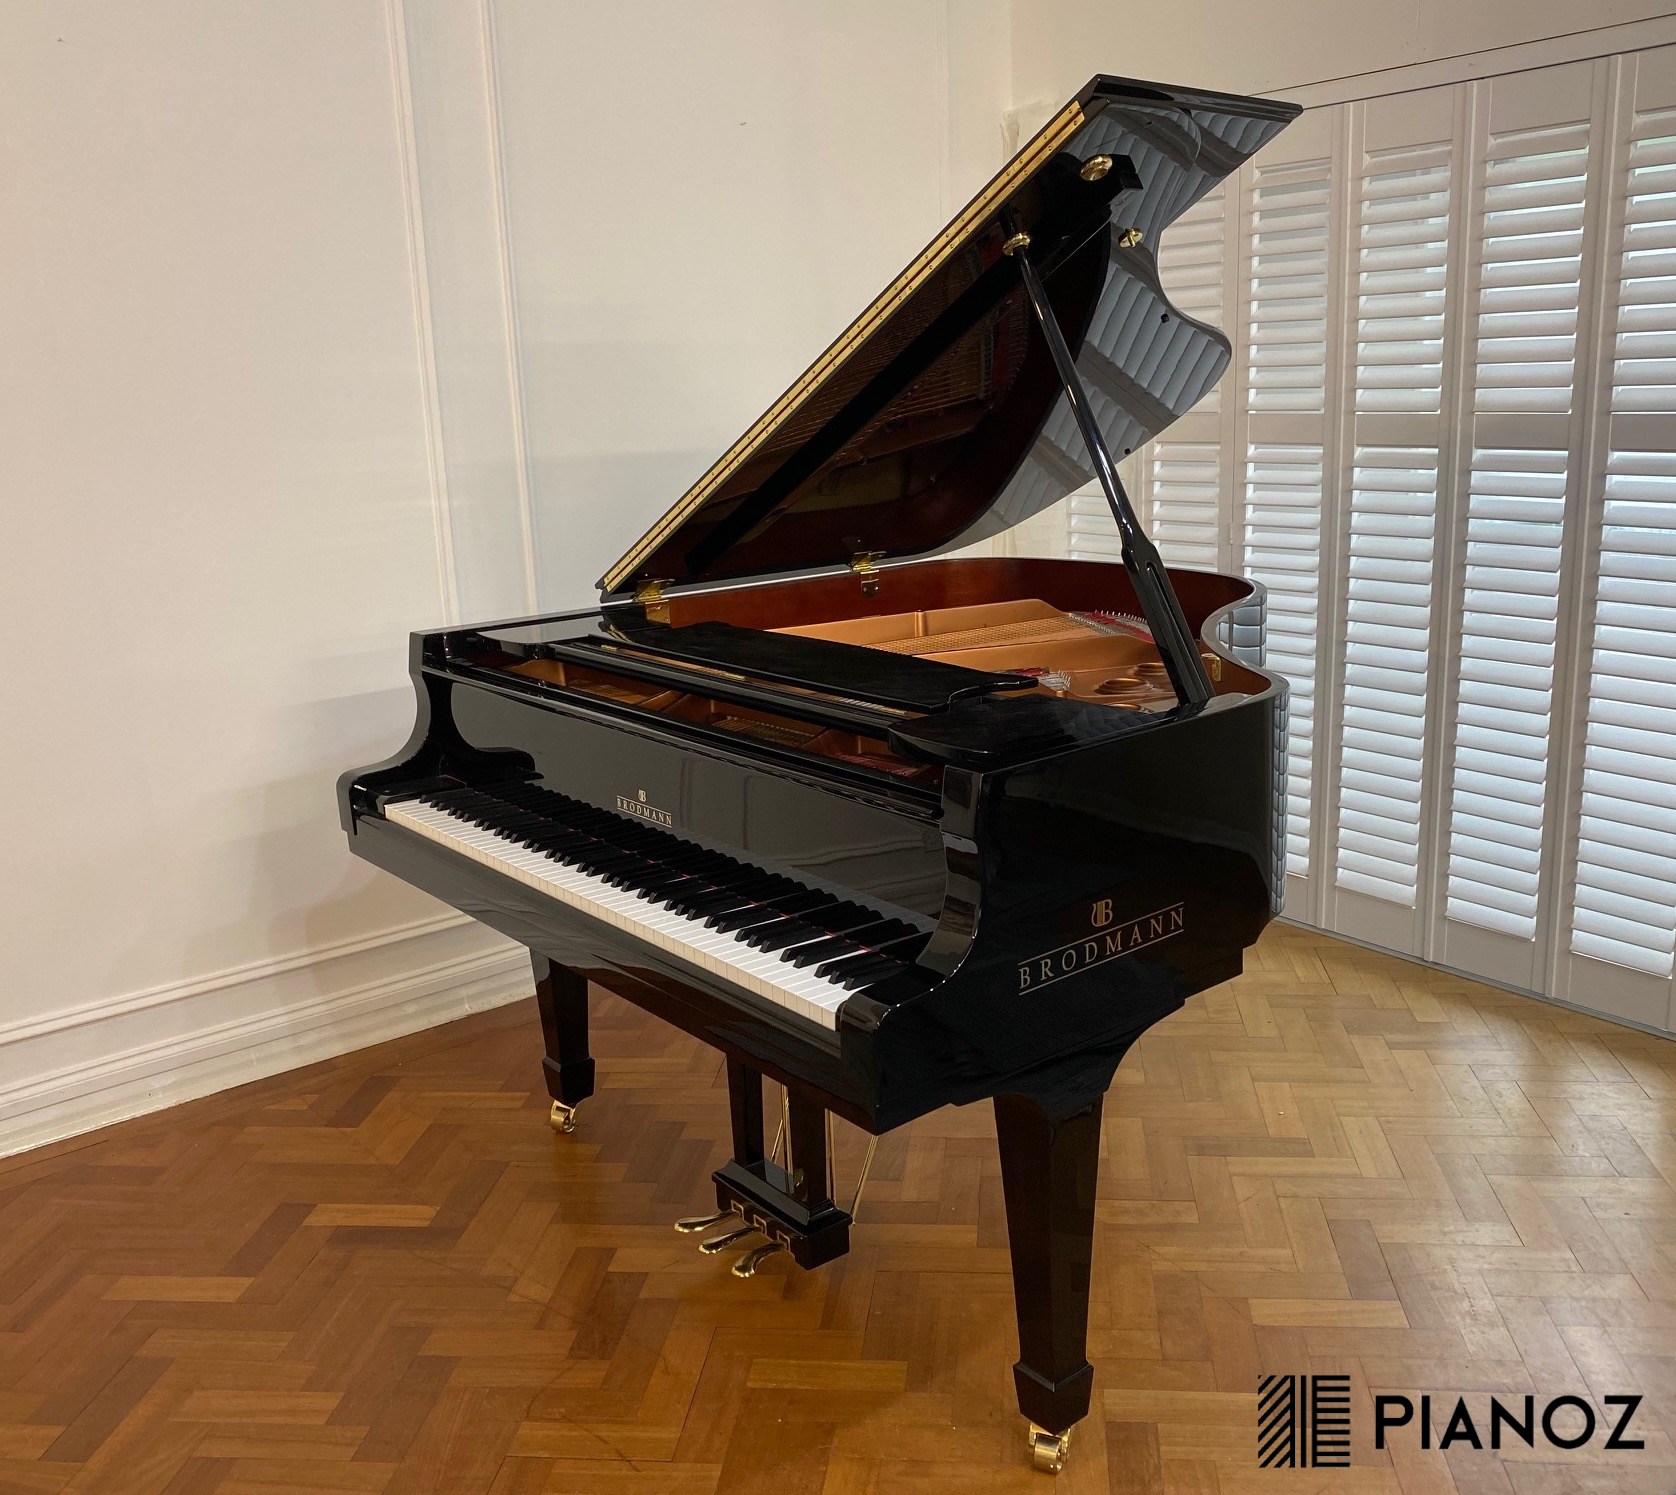 Brodmann 162 Baby Grand Piano piano for sale in UK